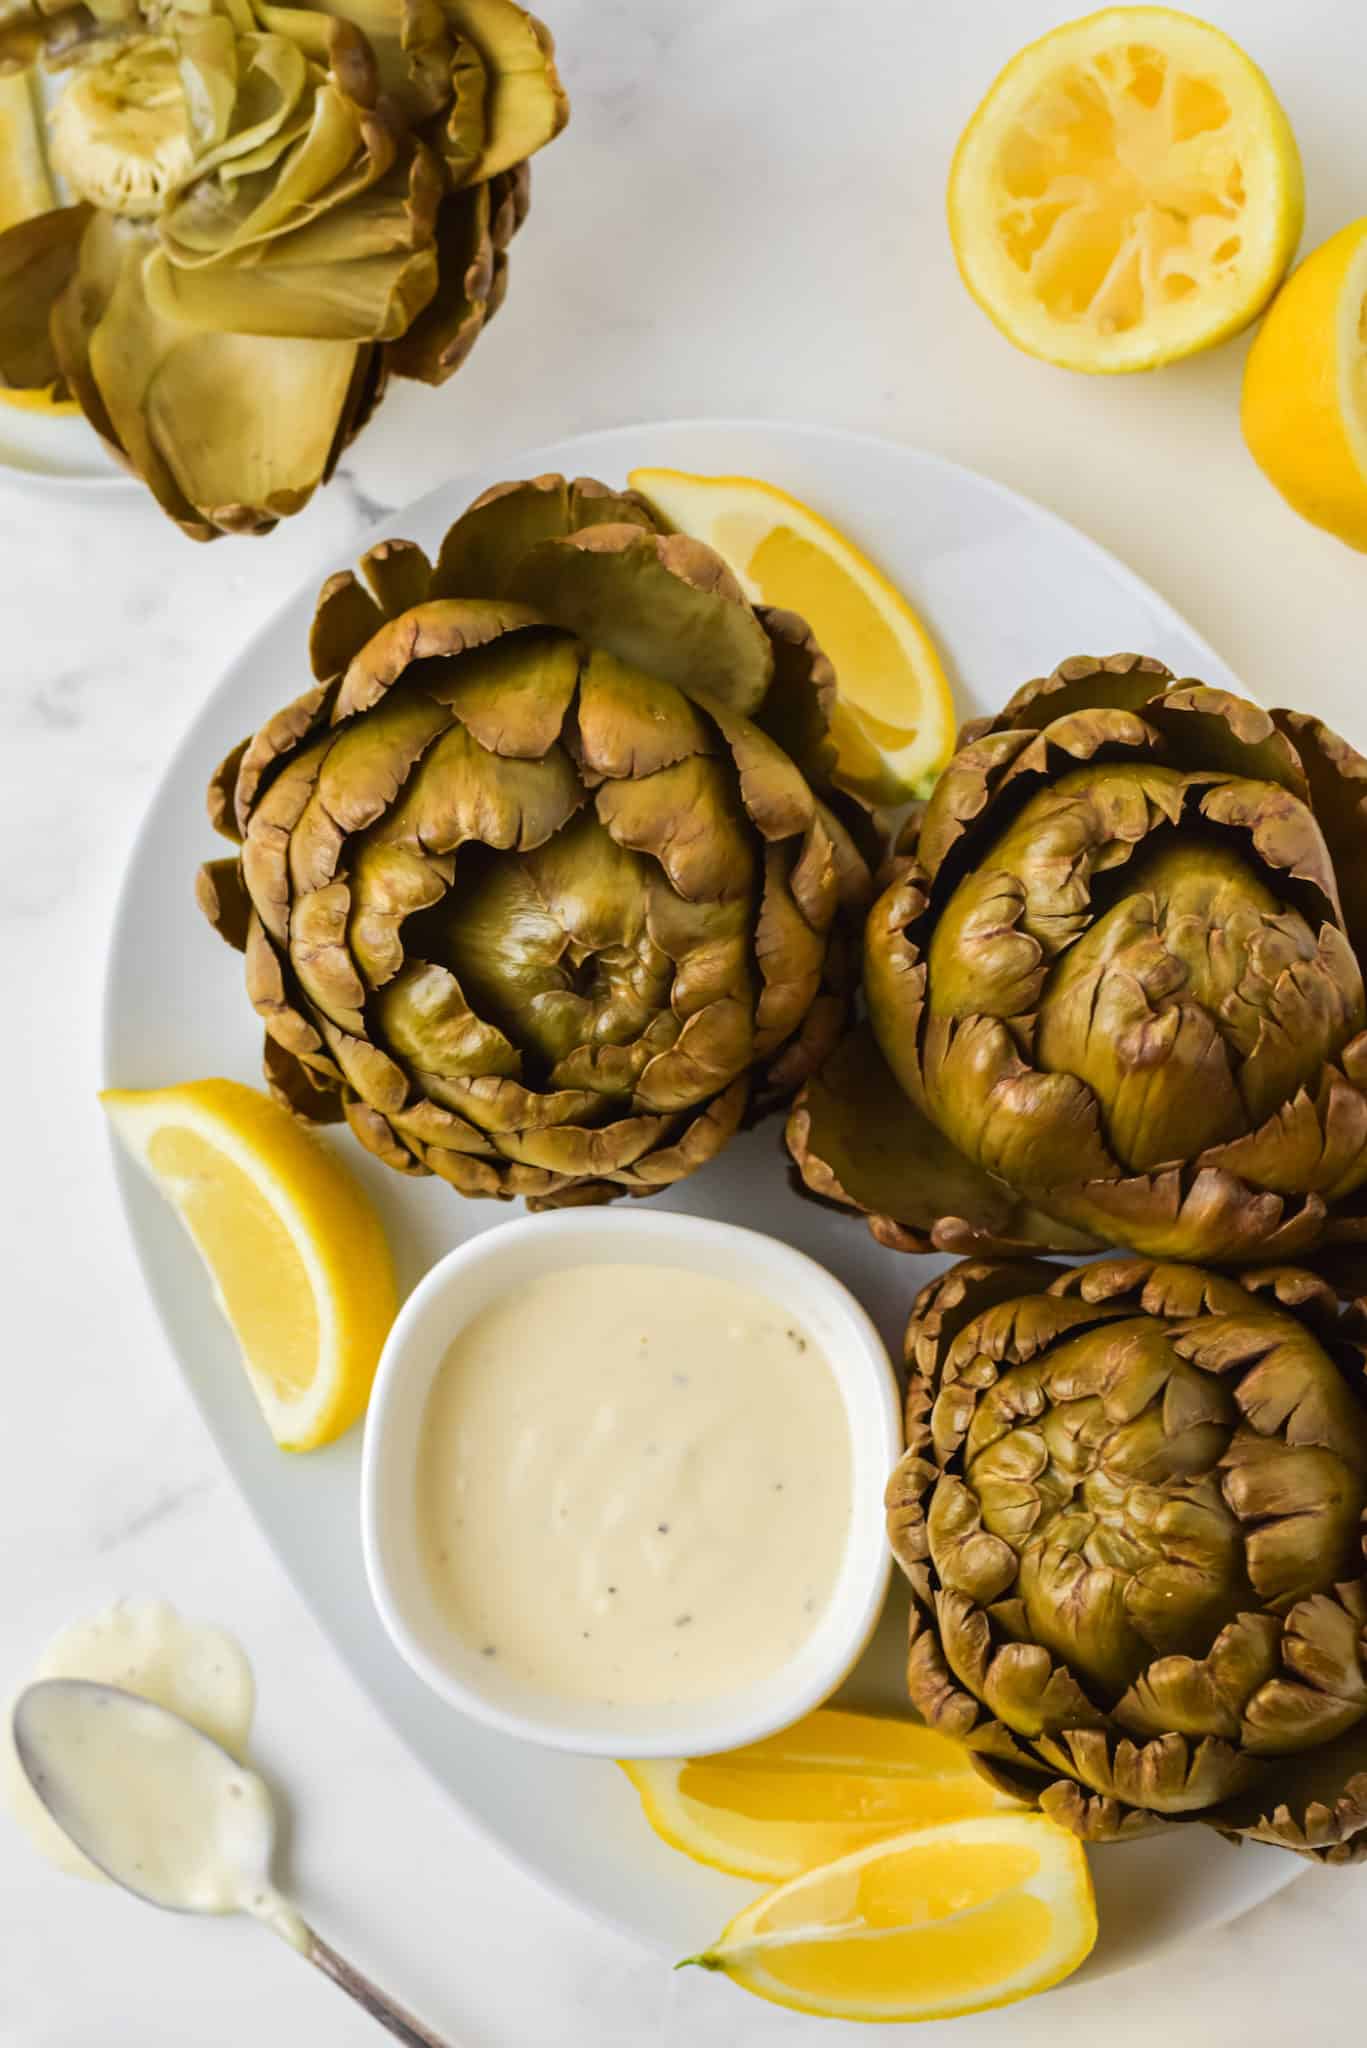 plate with cooked artichokes with lemon and dip sauce.